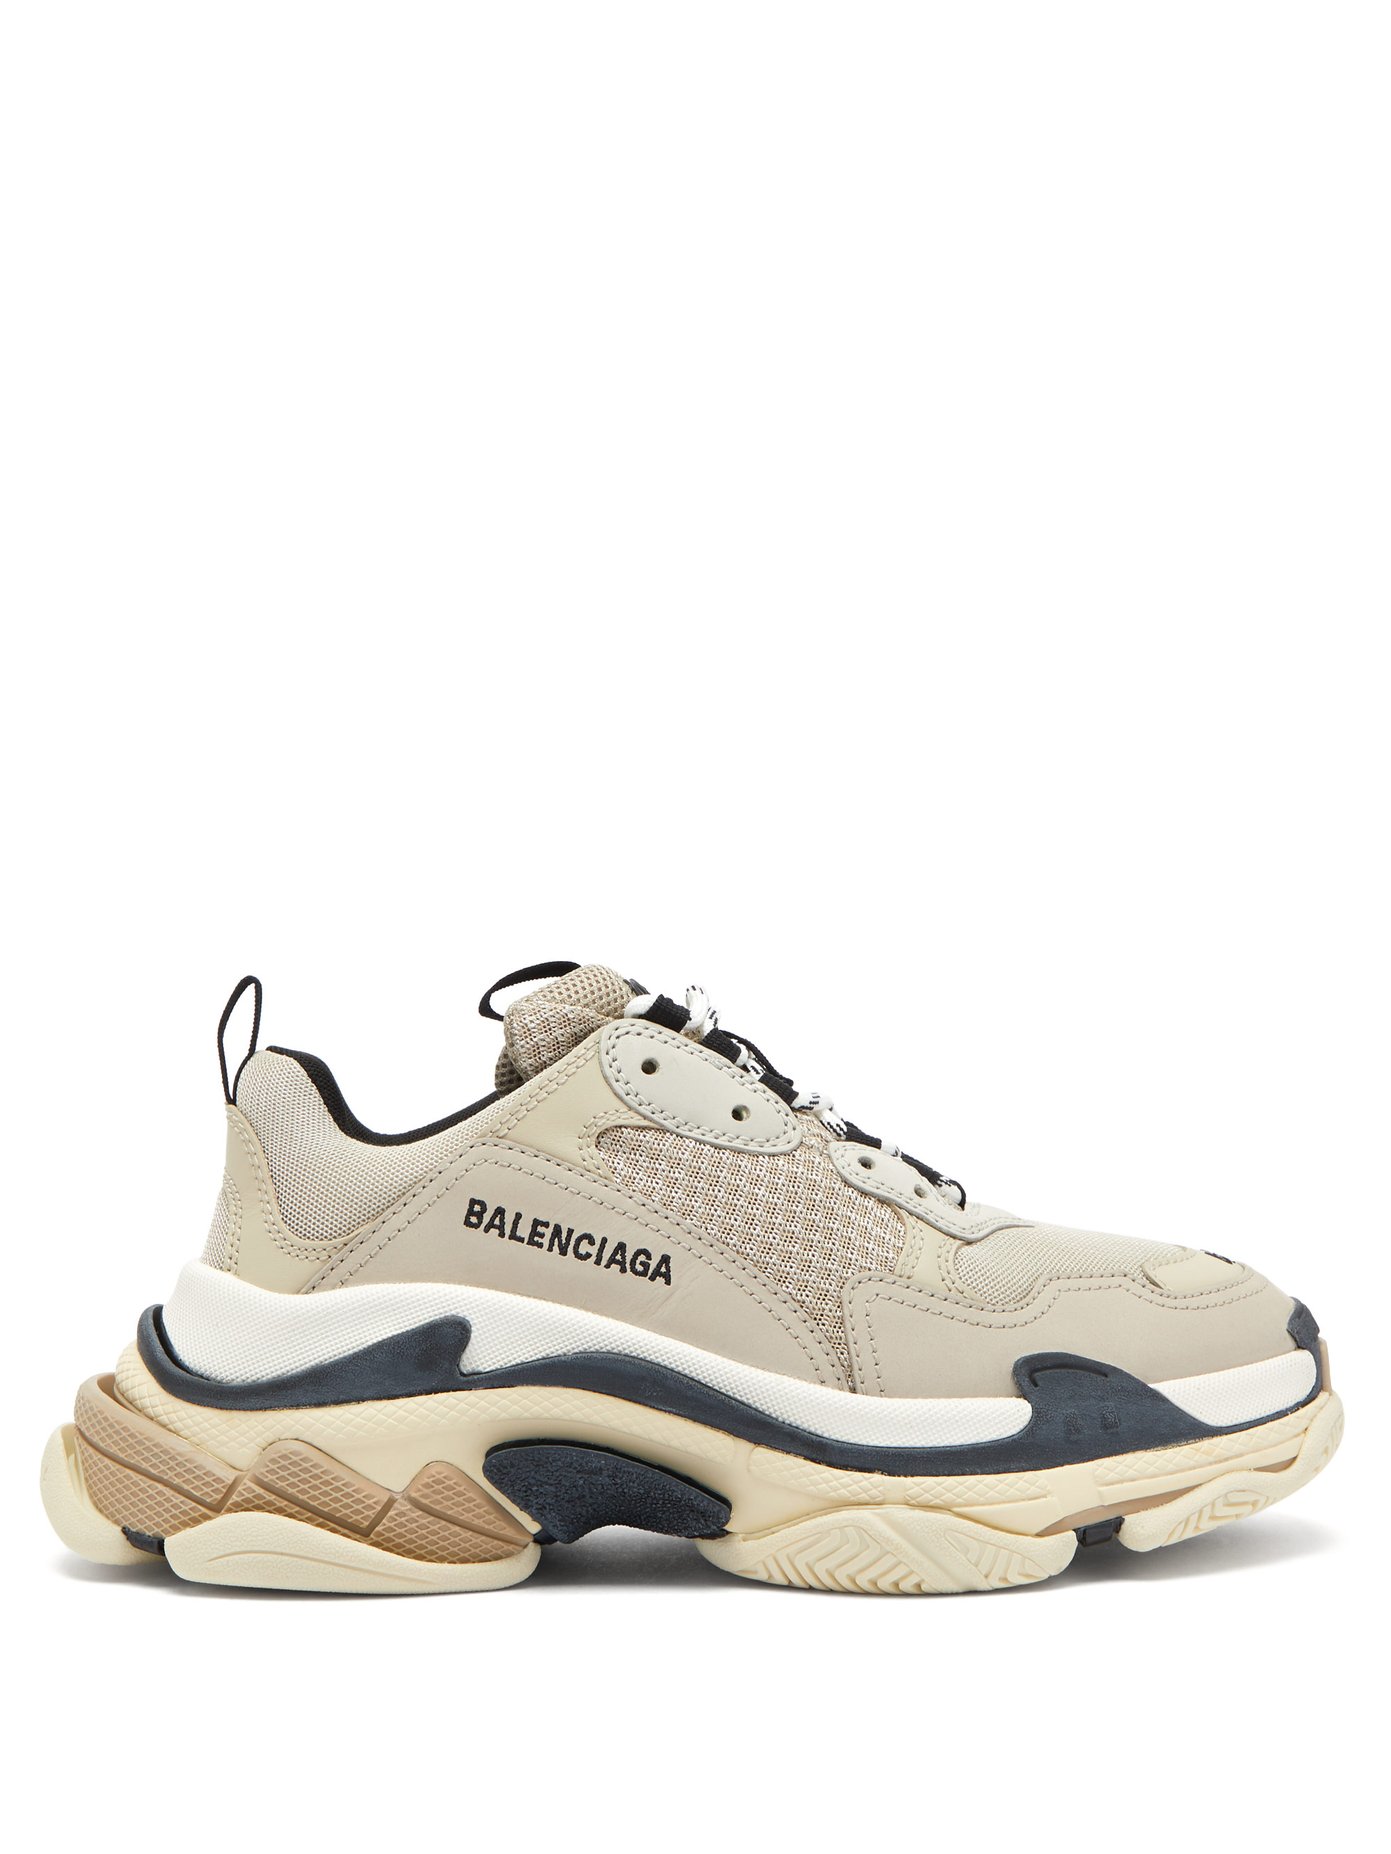 Balenciaga s Triple S Trainer Surfaces in New Colorway in